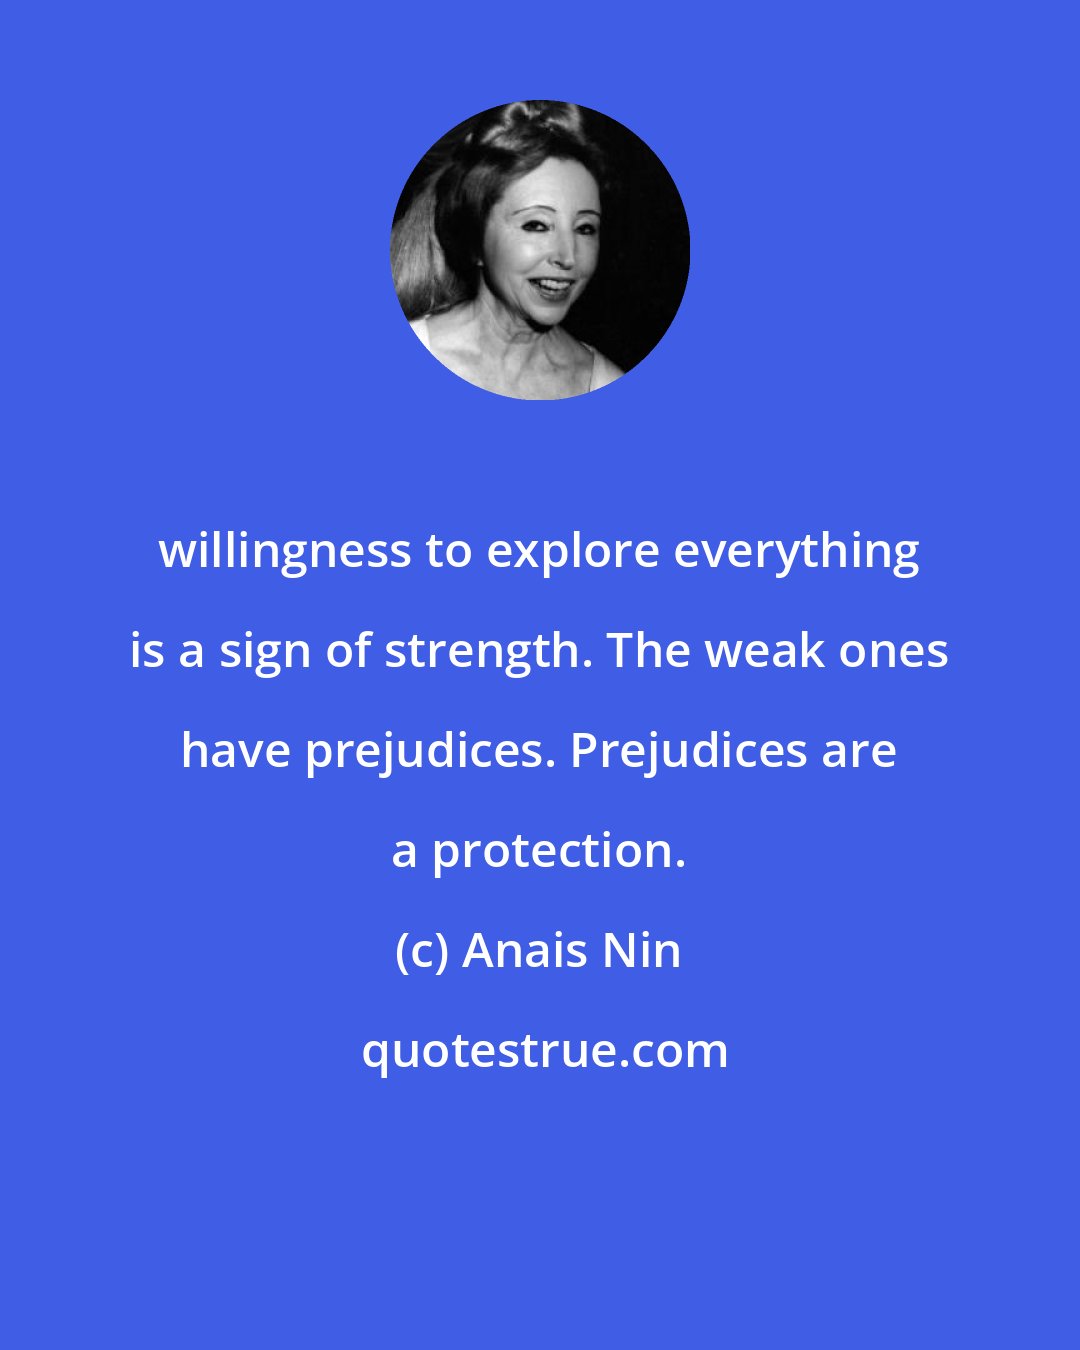 Anais Nin: willingness to explore everything is a sign of strength. The weak ones have prejudices. Prejudices are a protection.